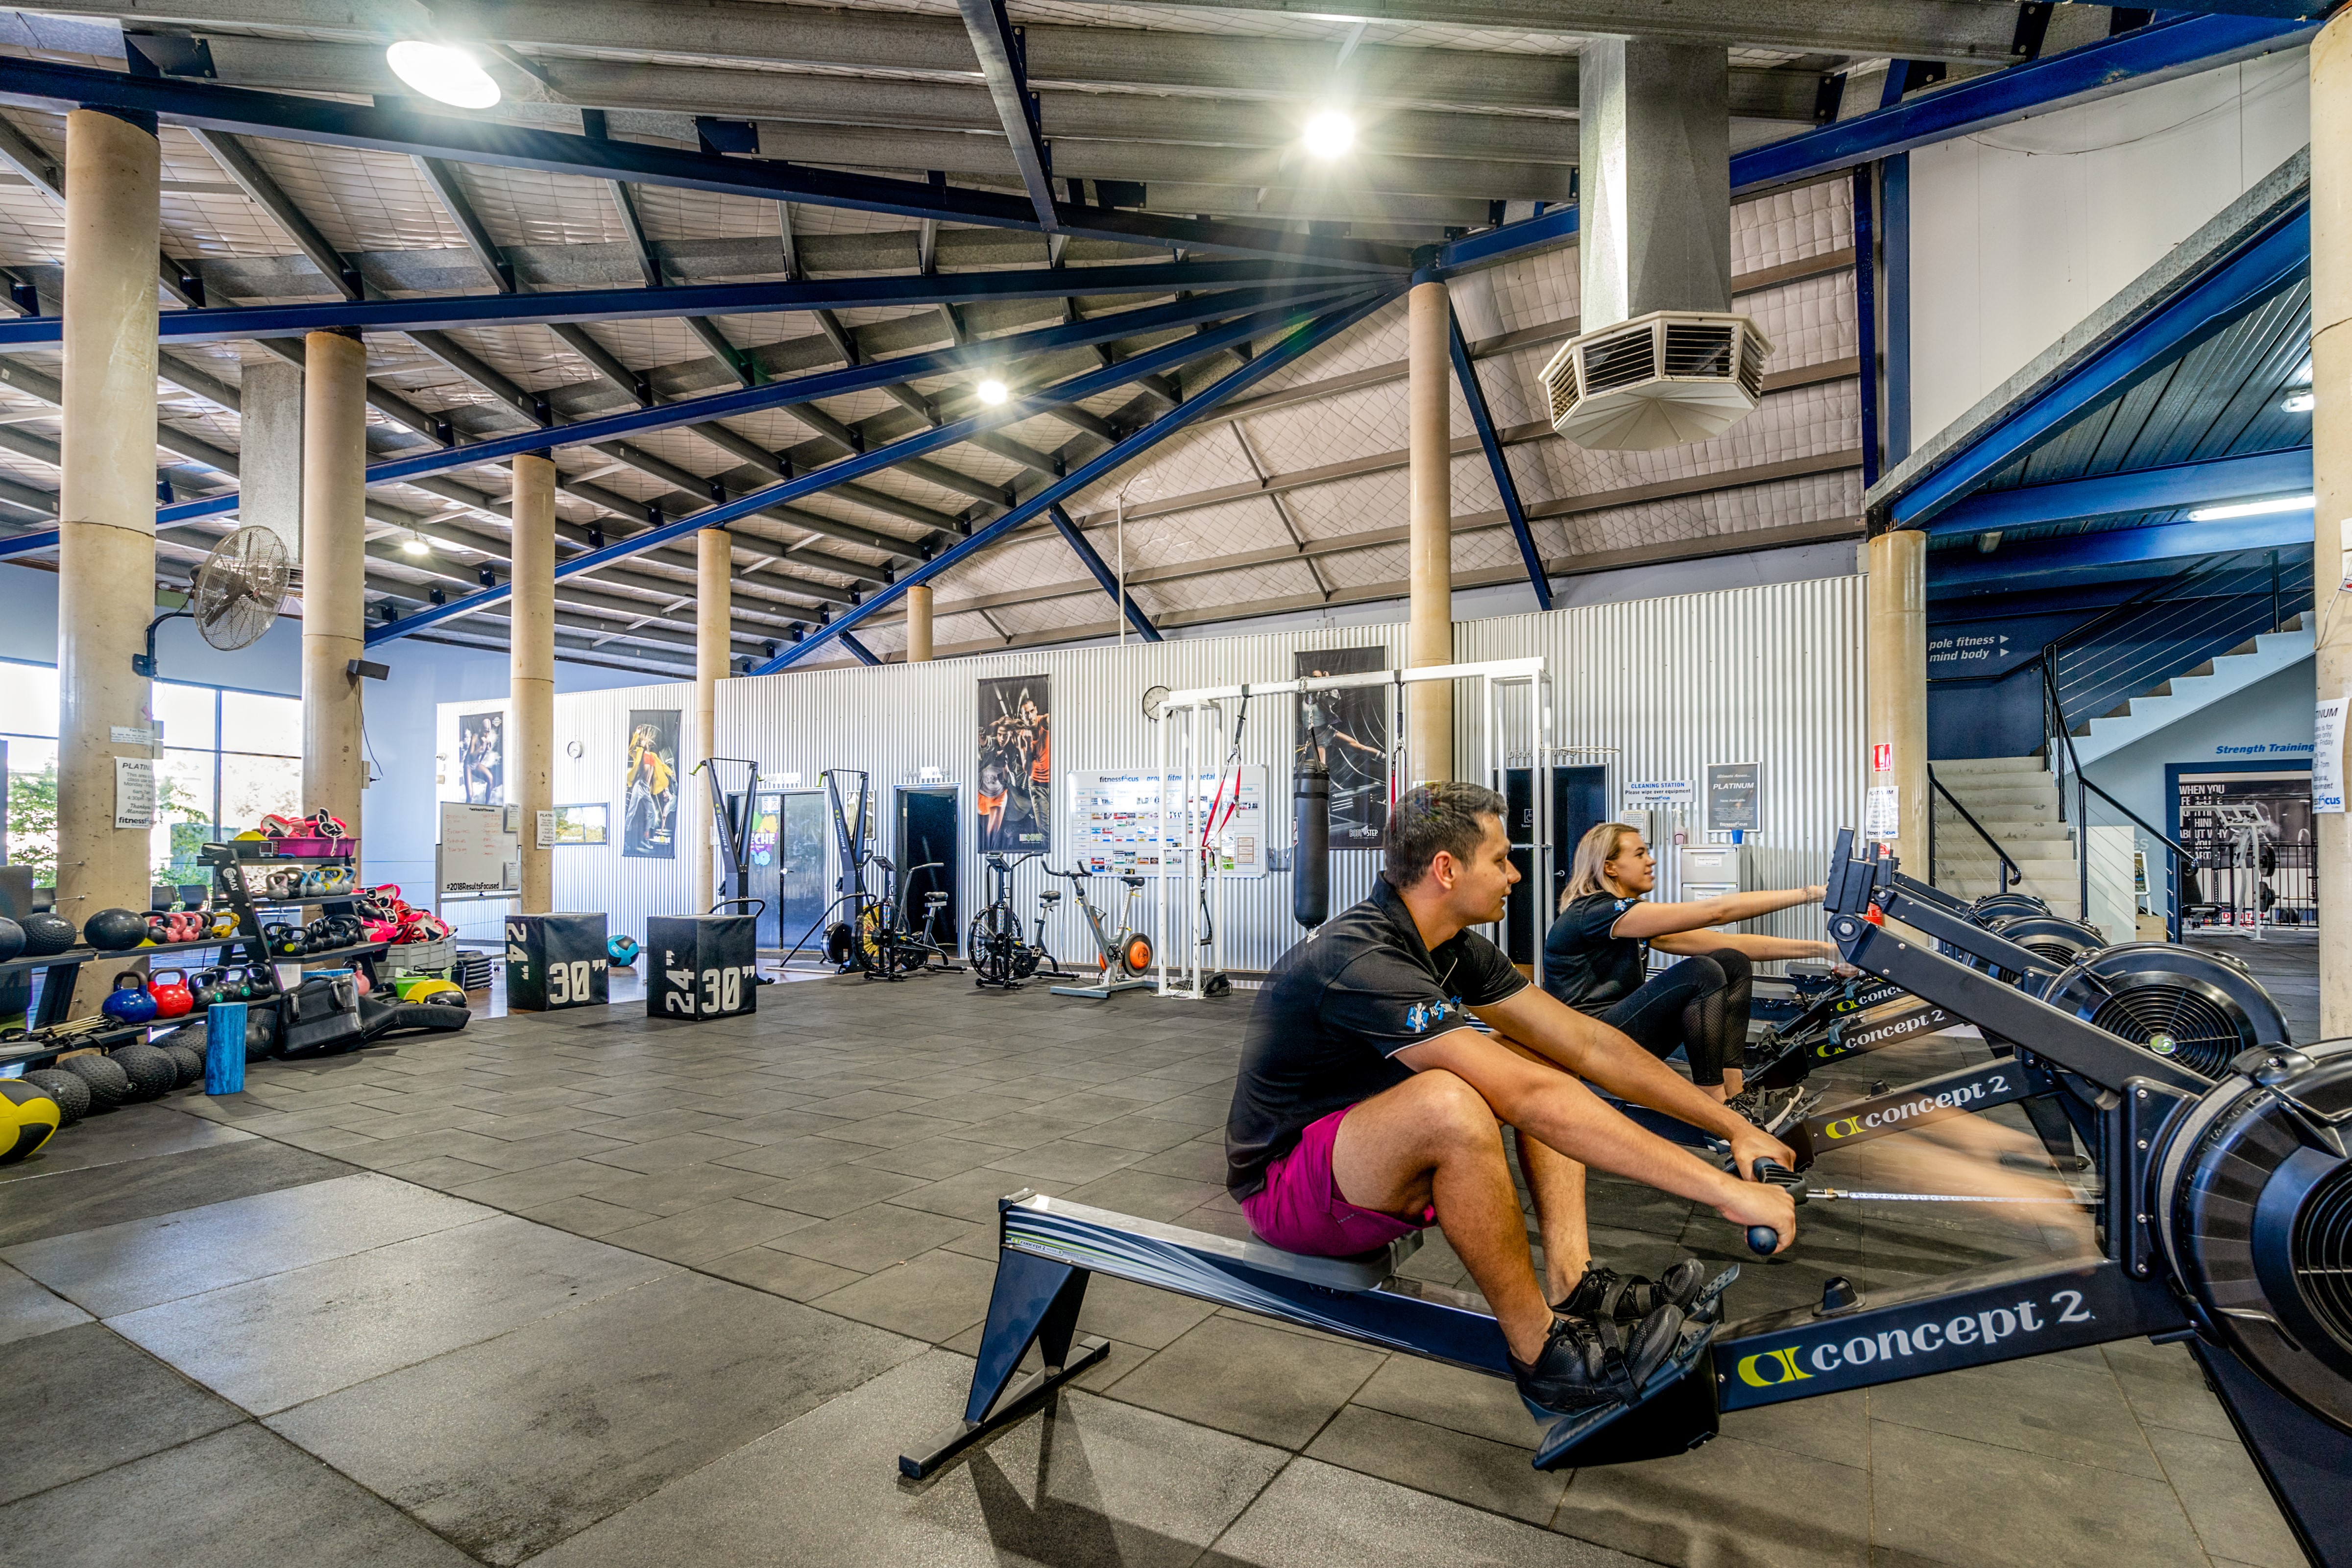 Fully Leased Investment to Established Fitness Facility